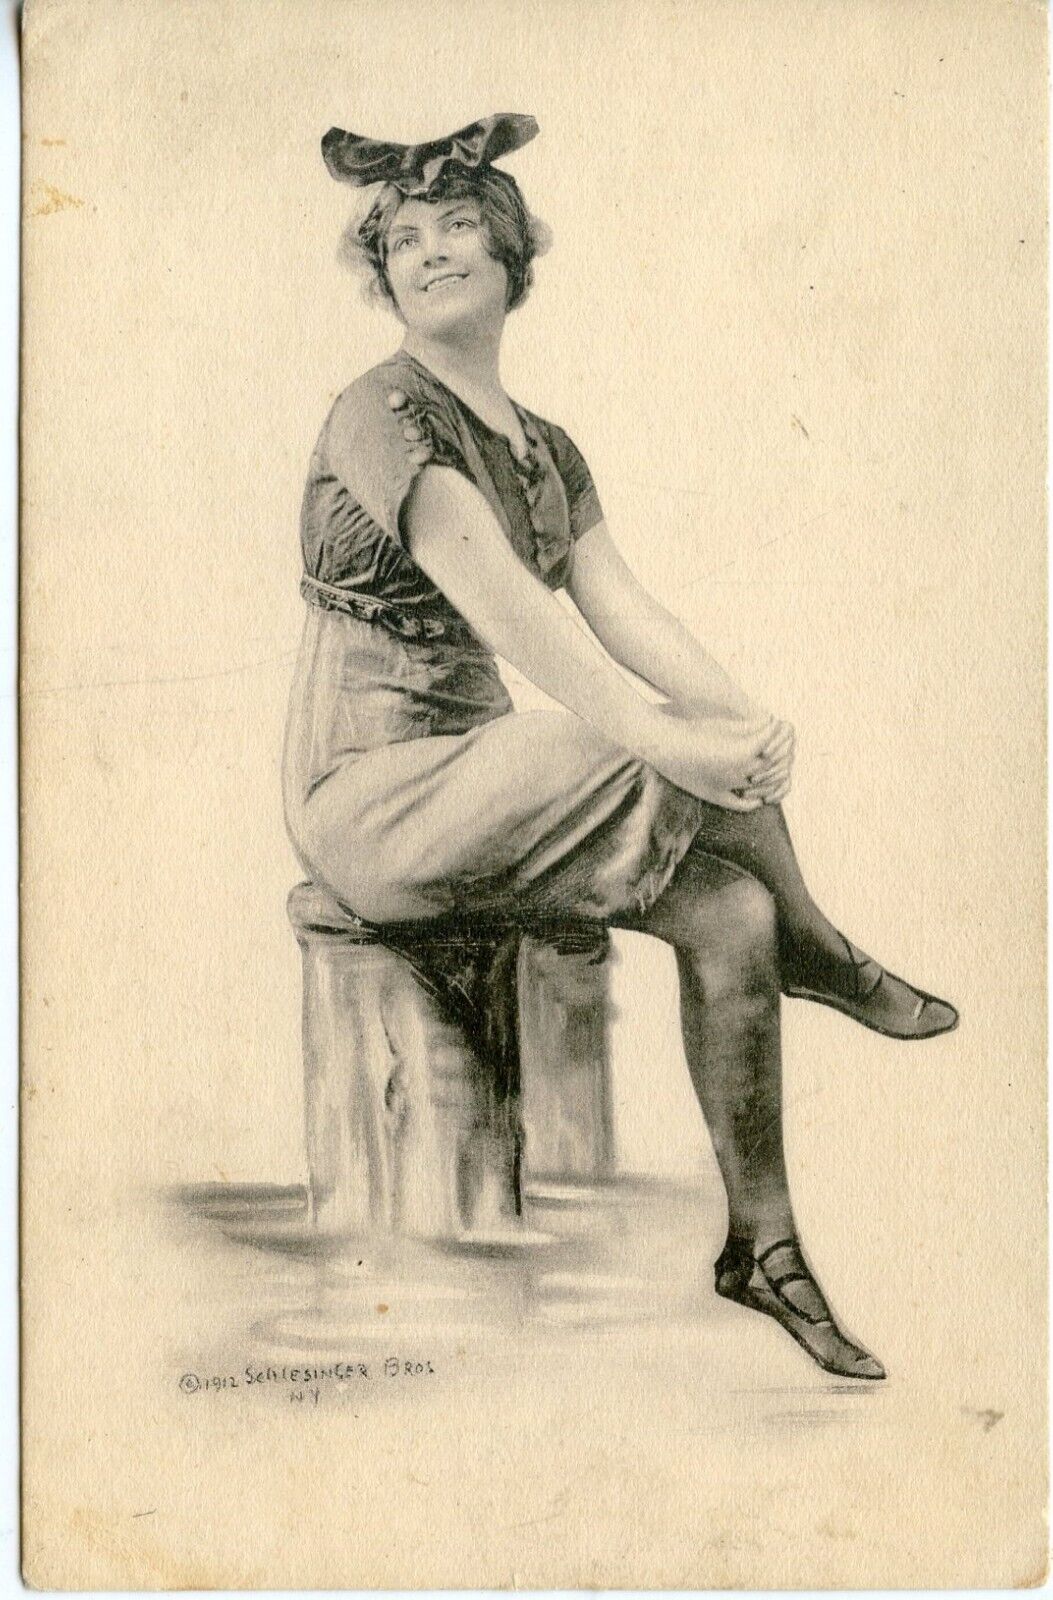 CPA / POSTCARD / FANTASY WOMAN IN THE HAT BELLE OF THE EAST / SCHLESINGER BROS